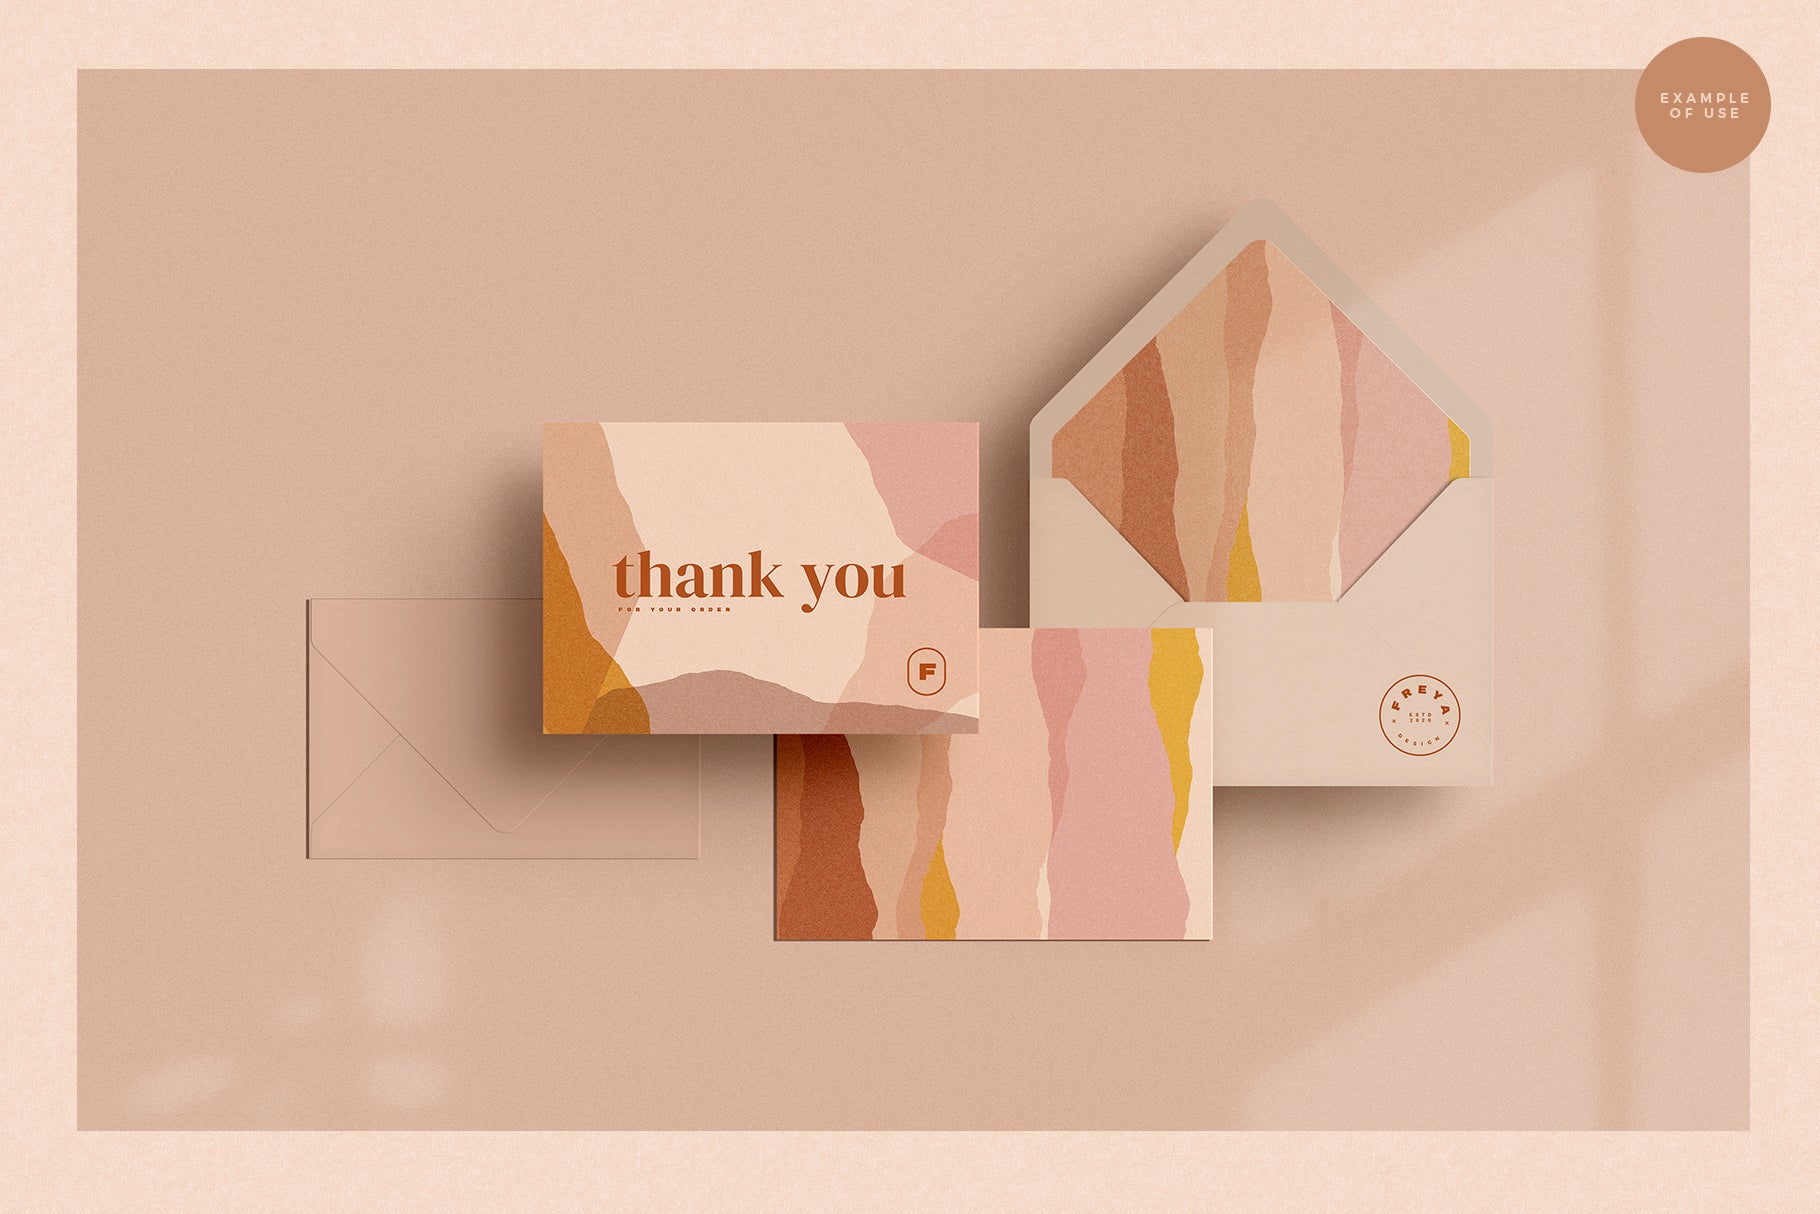 stationery design with abstract paper cutout shapes